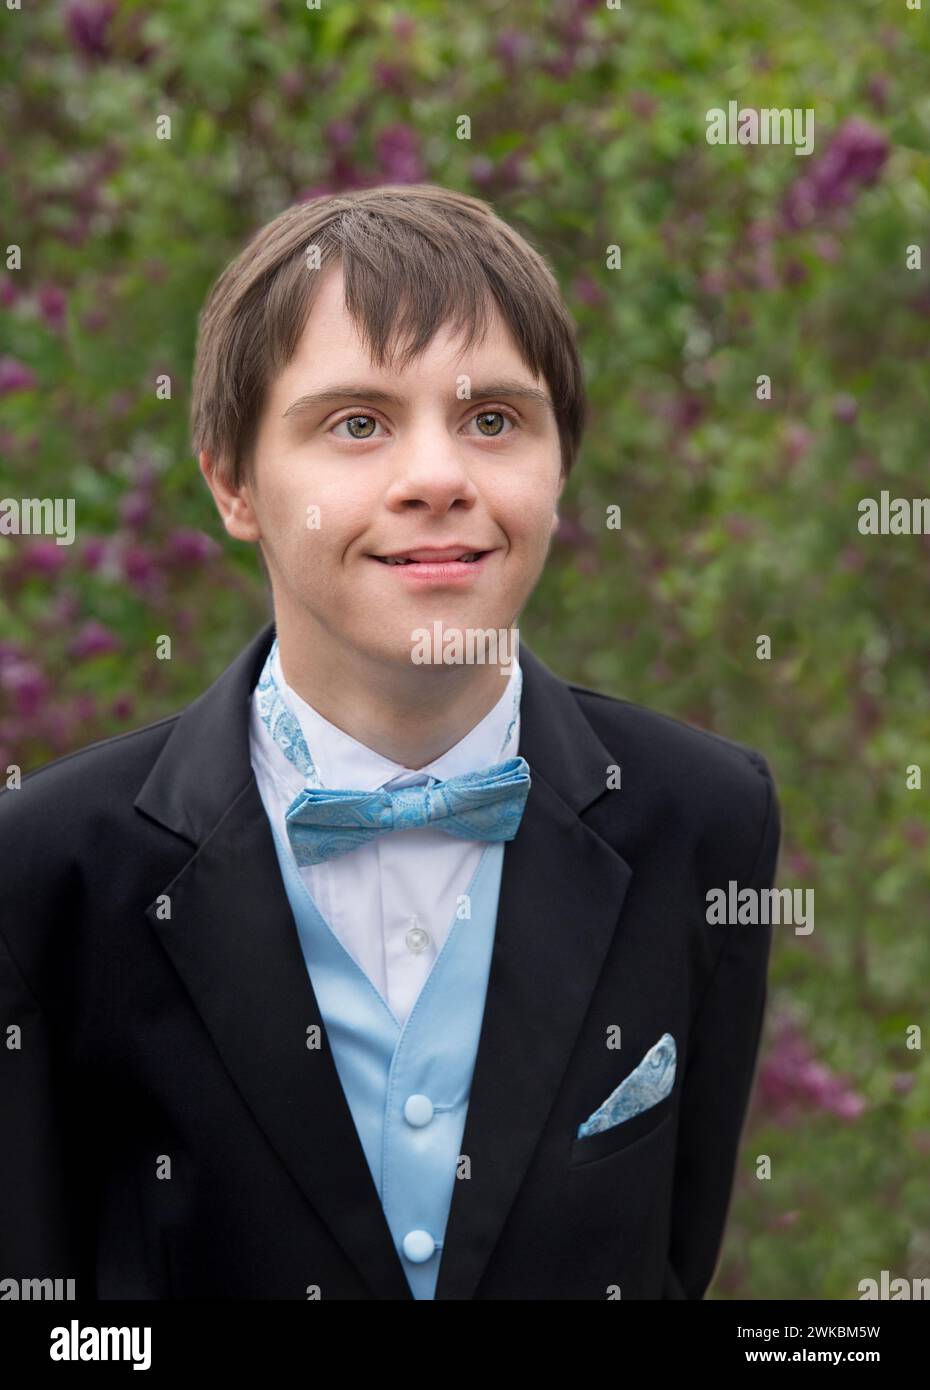 Teenage Boy with Special Needs in a Tuxedo Stock Photo